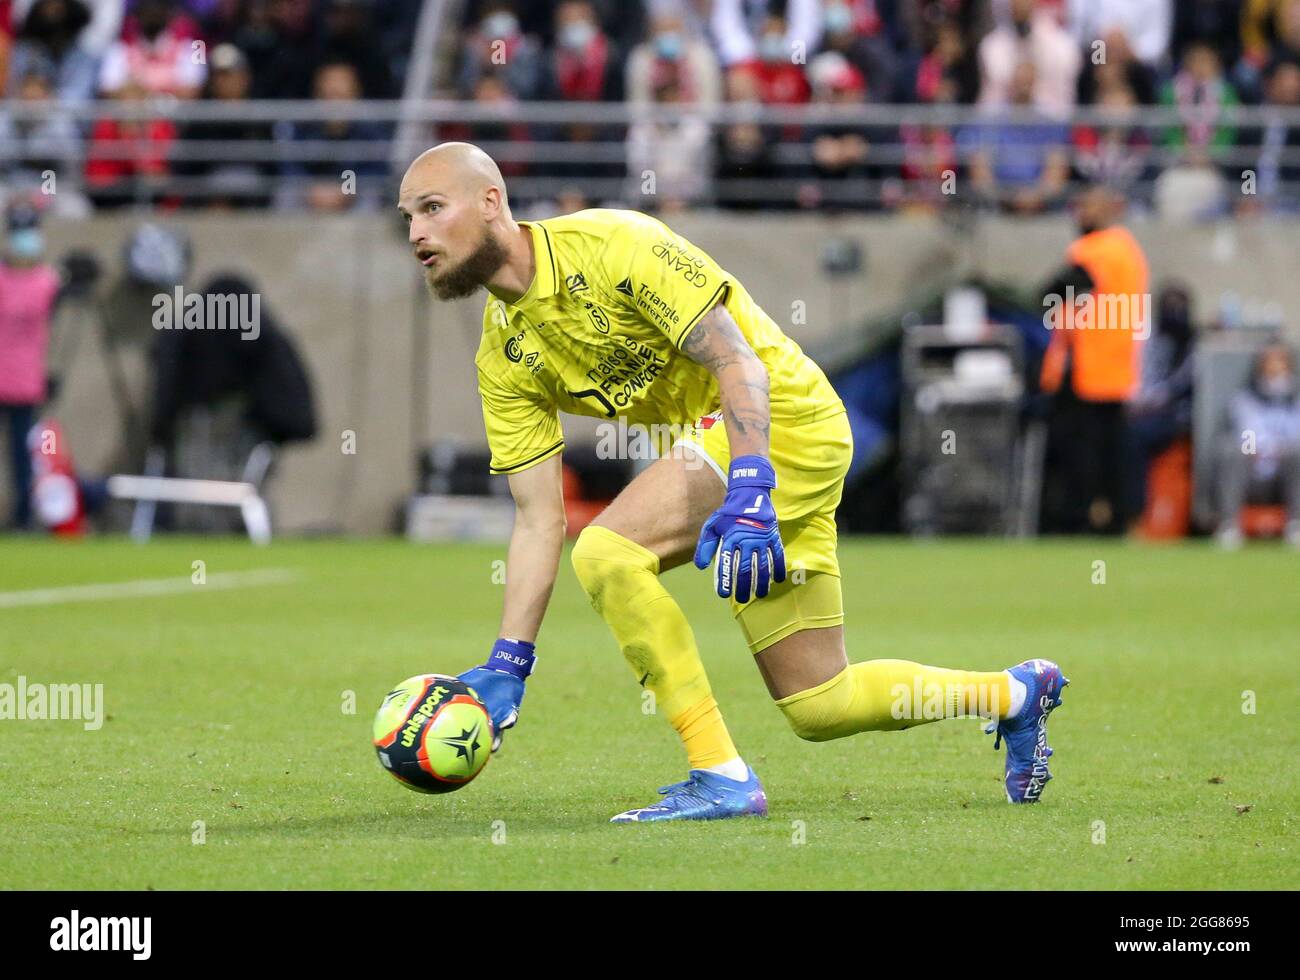 Reims, France. 29th Aug, 2021. Goalkeeper of Reims Predrag Rajkovic during the French championship Ligue 1 football match between Stade de Reims and Paris Saint-Germain on August 29, 2021 at Auguste Delaune stadium in Reims, France - Photo Jean Catuffe/DPPI Credit: DPPI Media/Alamy Live News Stock Photo